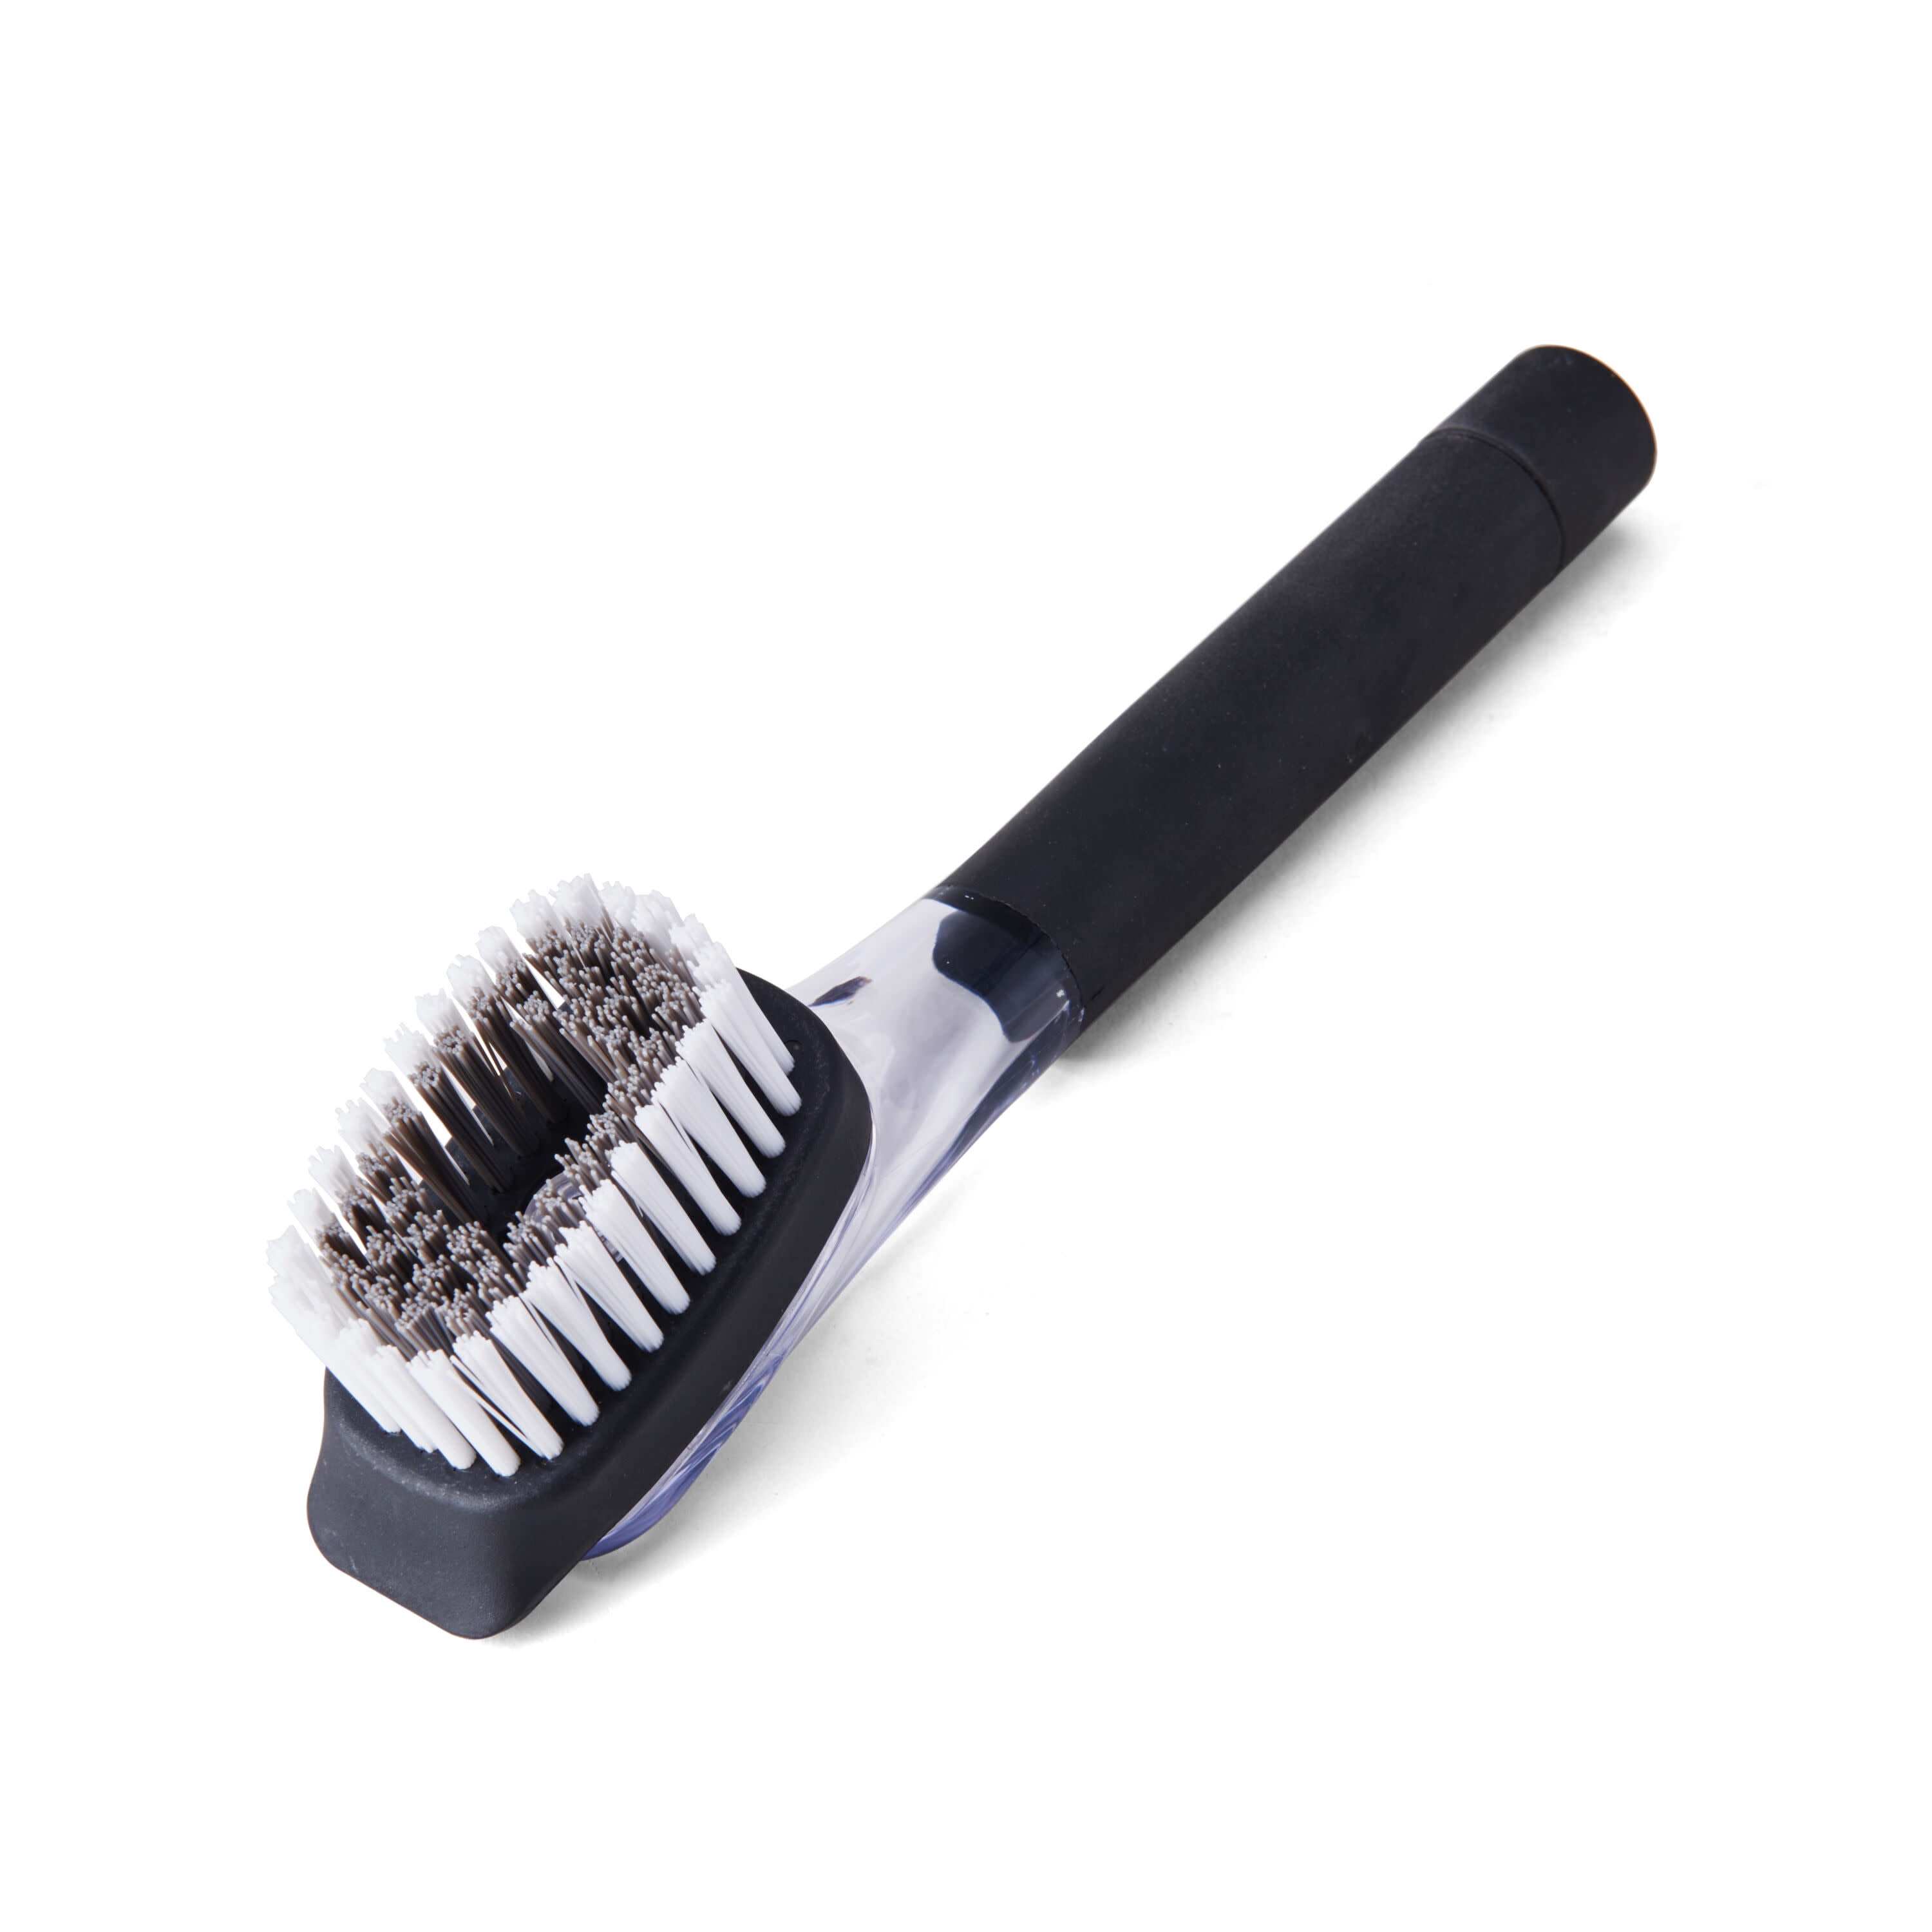 Kitchen Sink Squeegee and Countertop Brush, Multi-Purpose, Cleans Wet and Dry Spills, Dishwasher Safe, White, Size: One size, Black